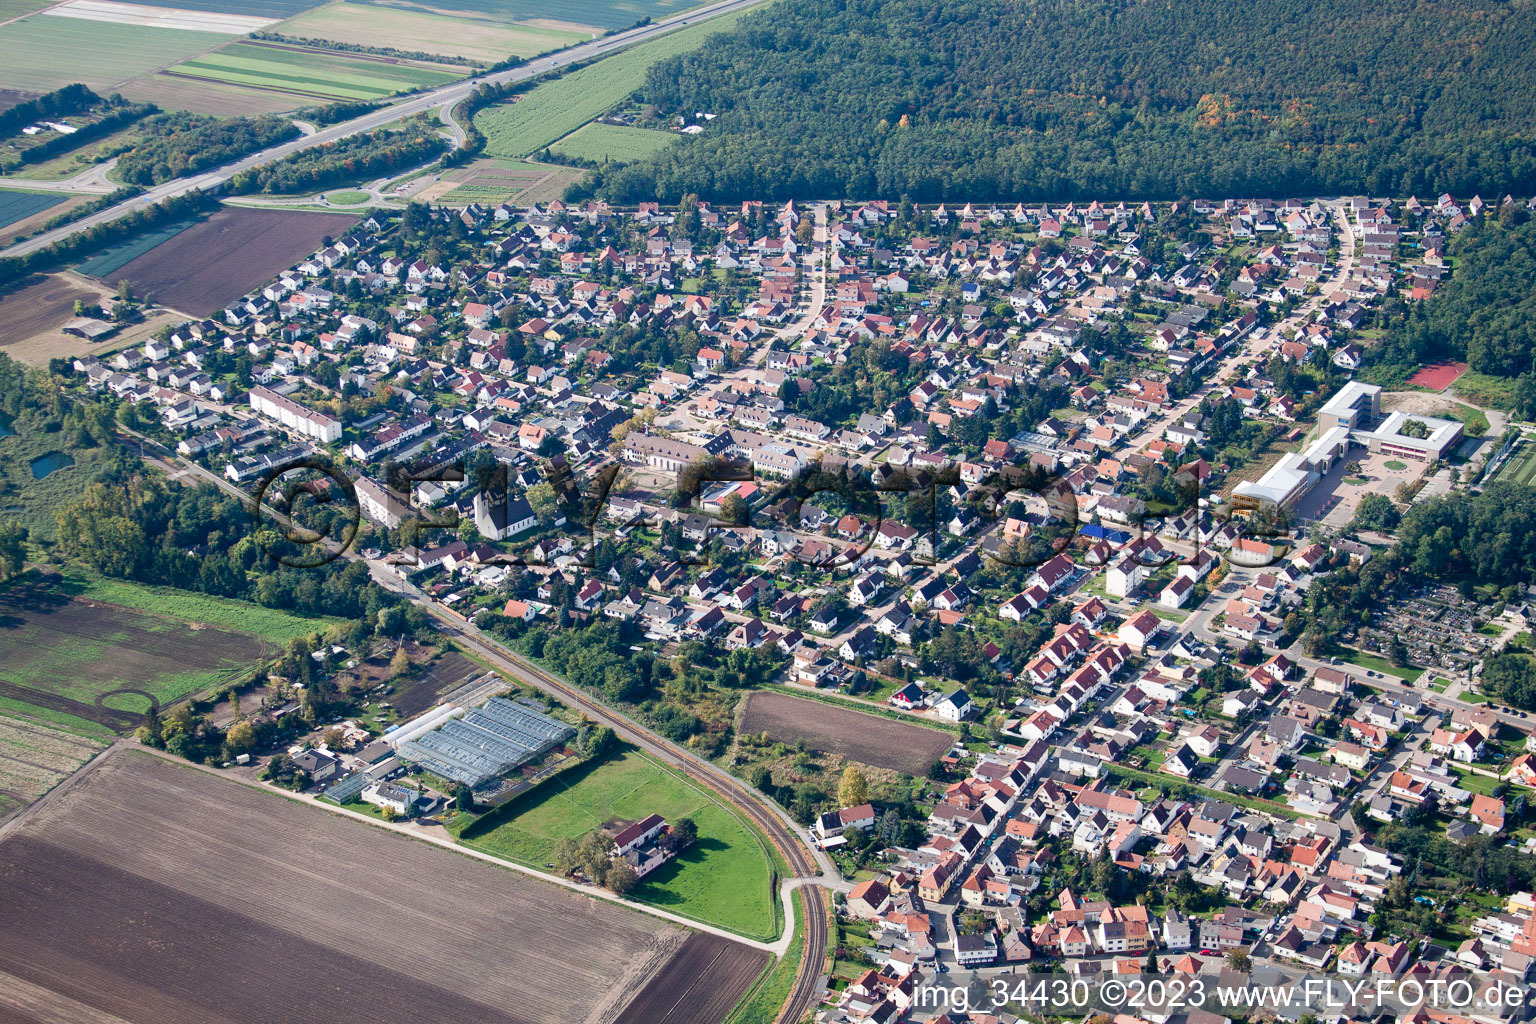 Aerial photograpy of Maxdorf in the state Rhineland-Palatinate, Germany